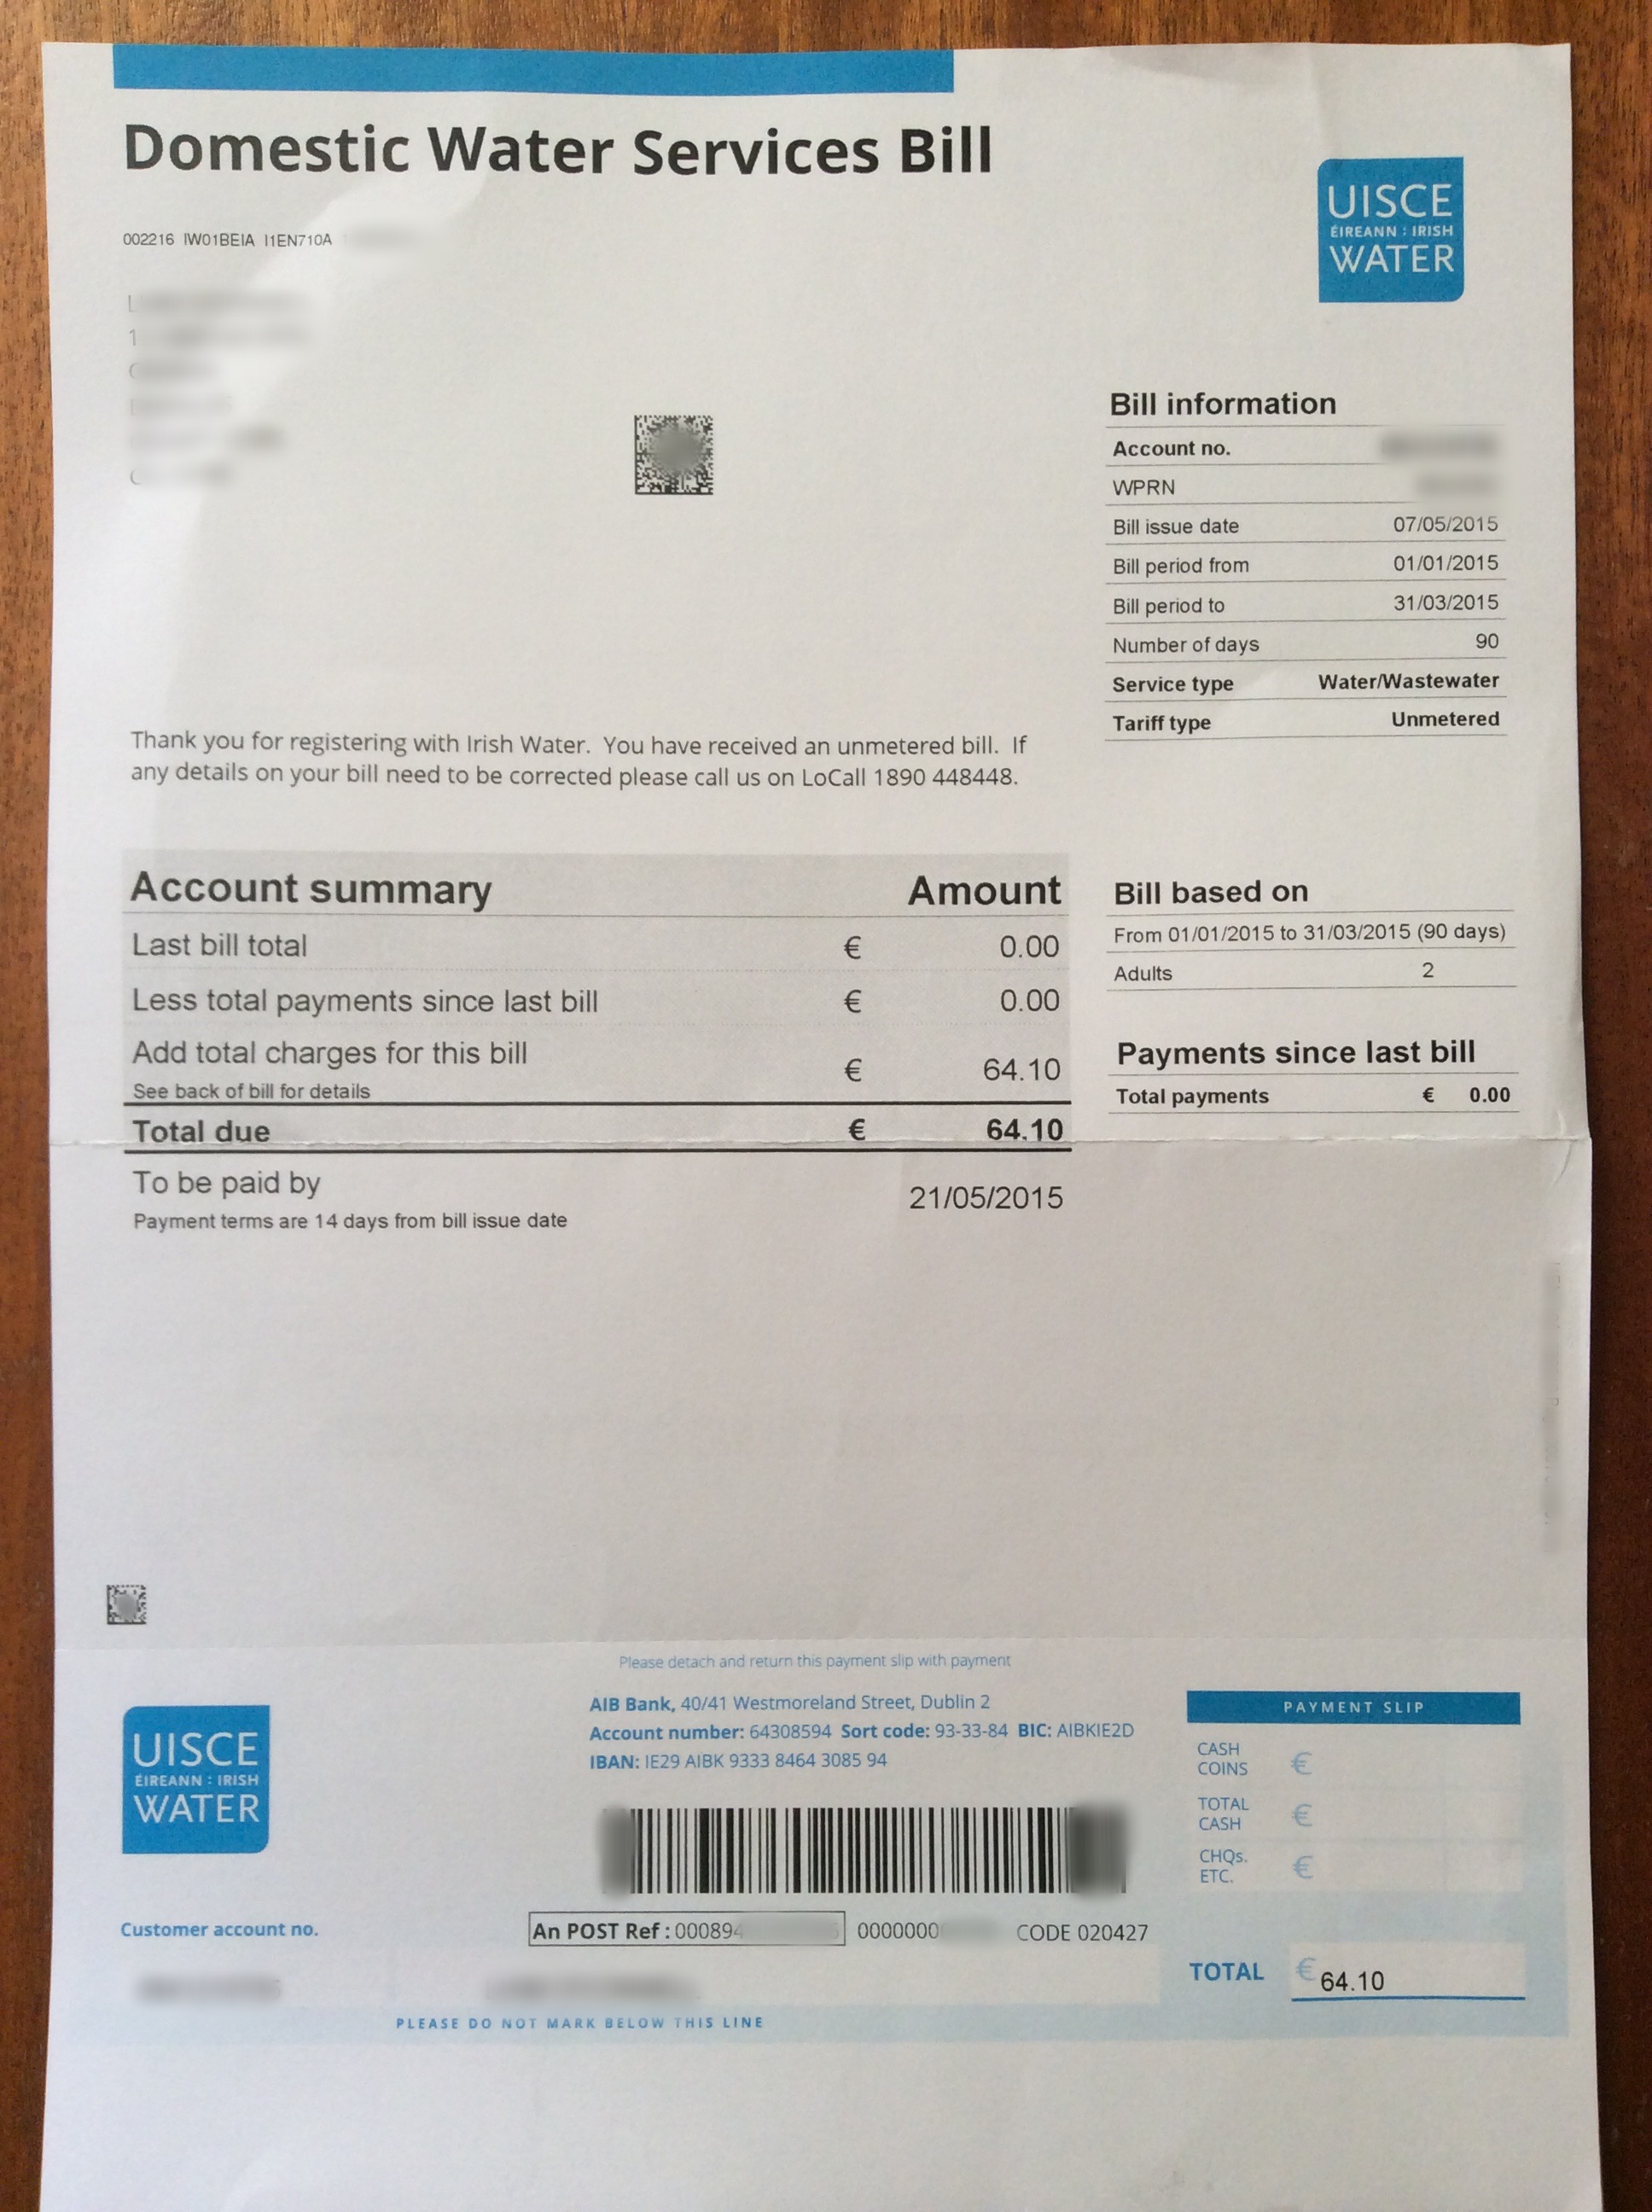 Indah Water Bill Payment So this is what an Irish Water utility bill